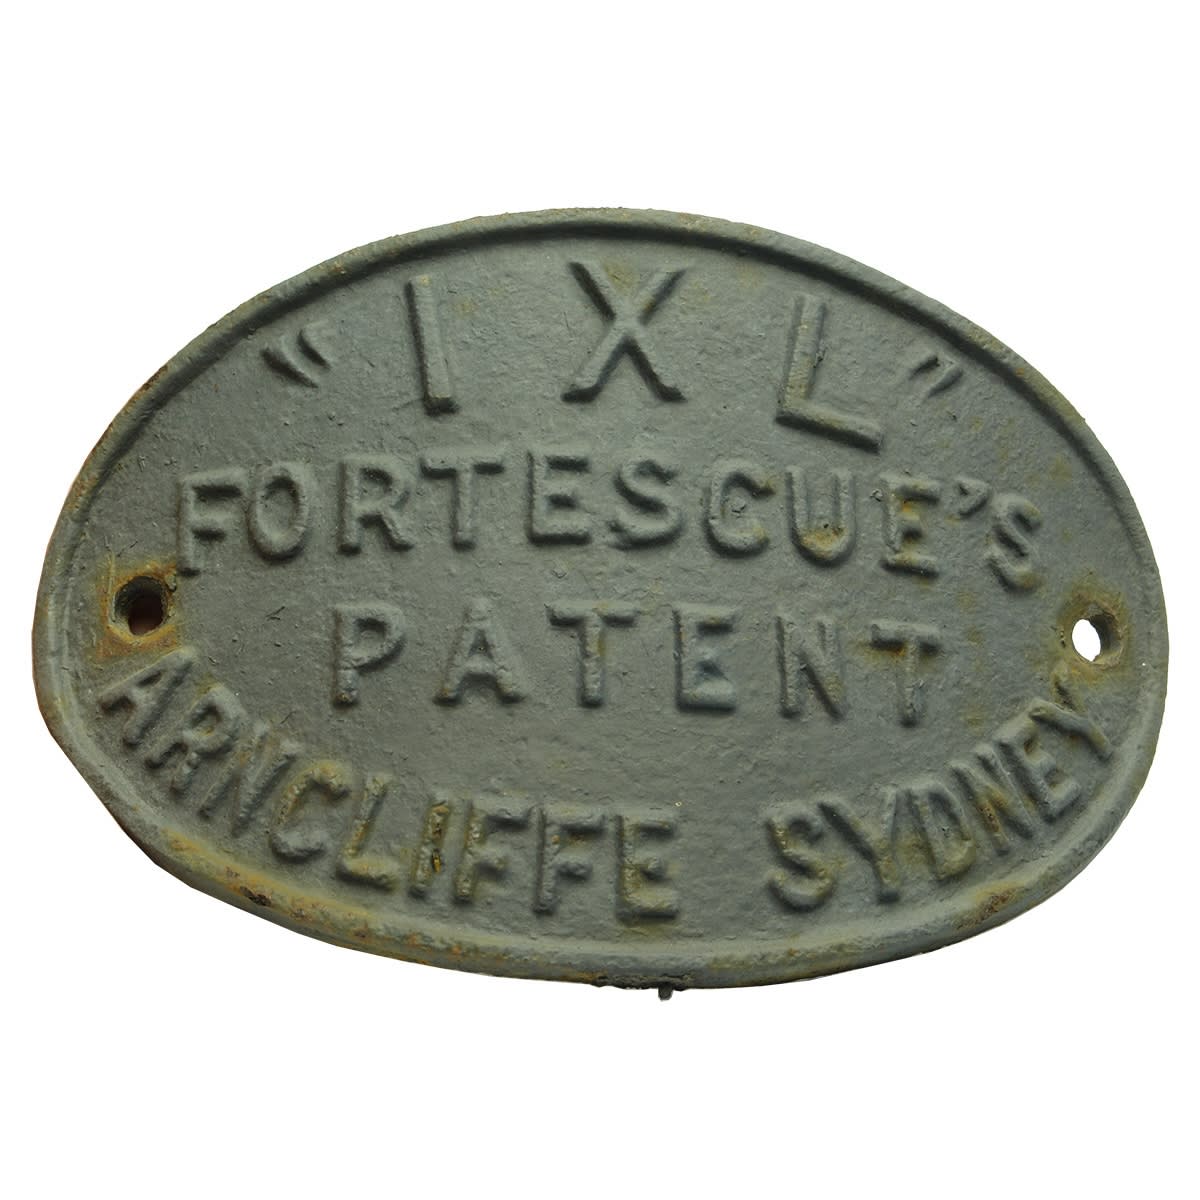 Cast Iron Nameplate. IXL Fortescue's Patent Arncliffe Sydney. (New South Wales)